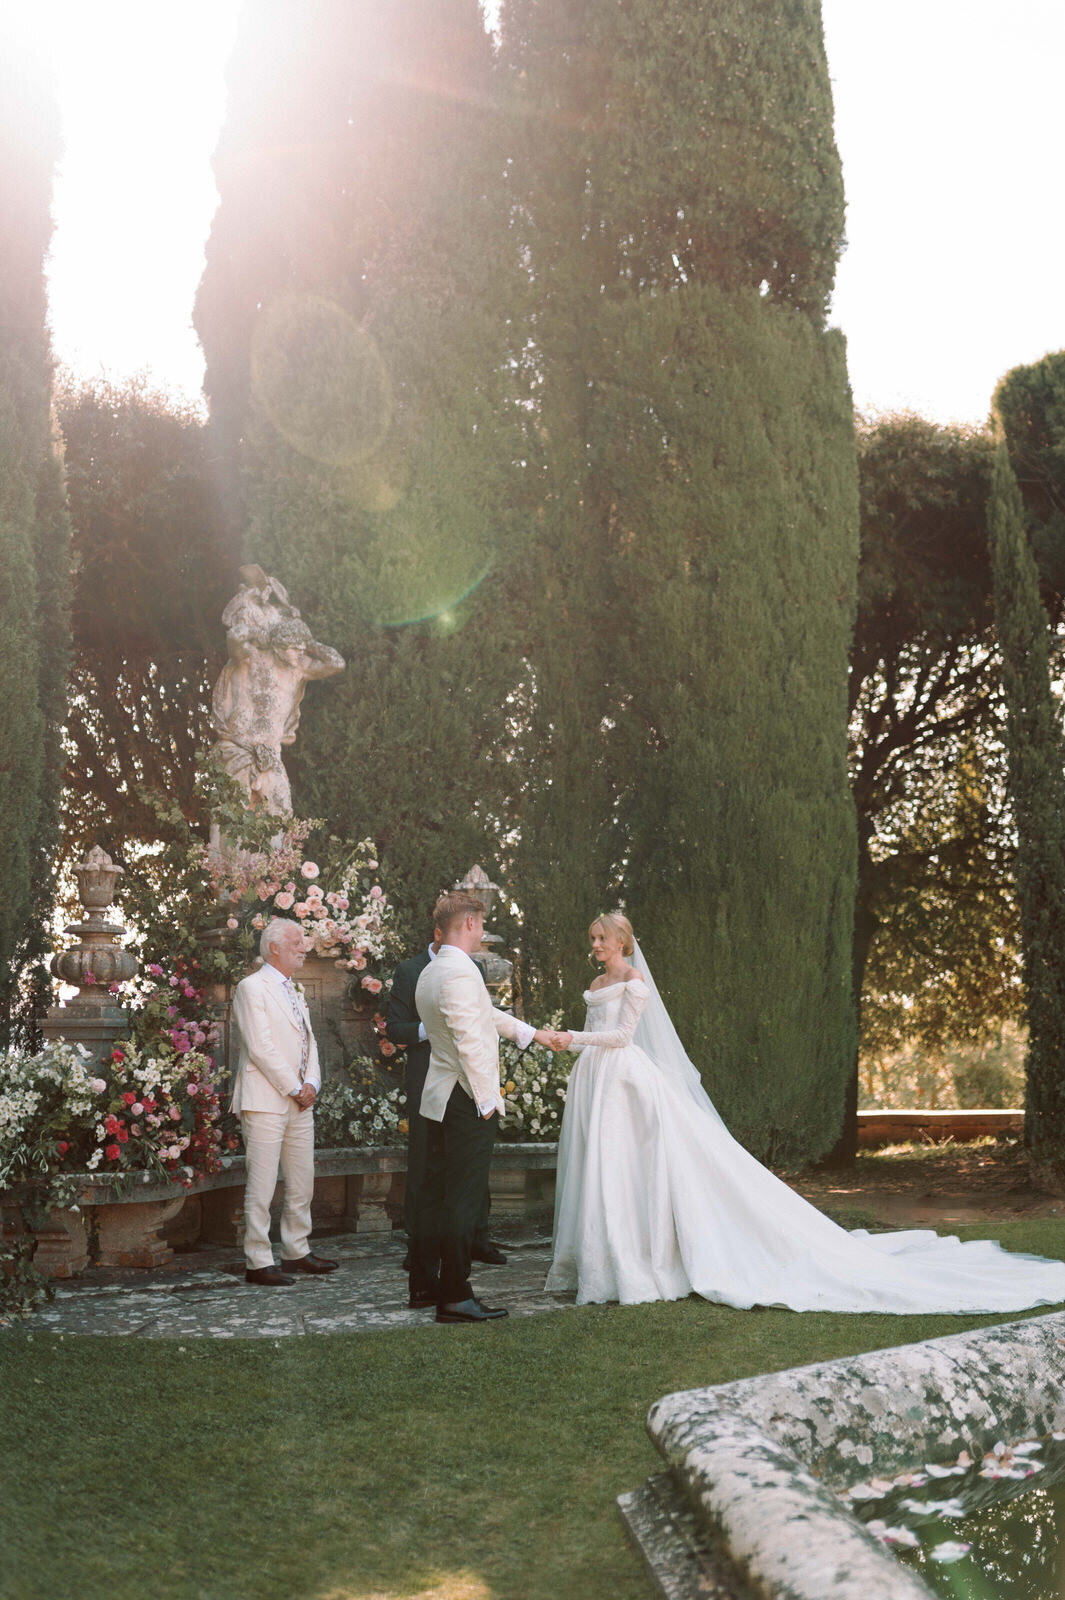 Flora_And_Grace_Editorial_Tuscany_Analog_Editorial_Wedding_Photographer (1 von 1)-83